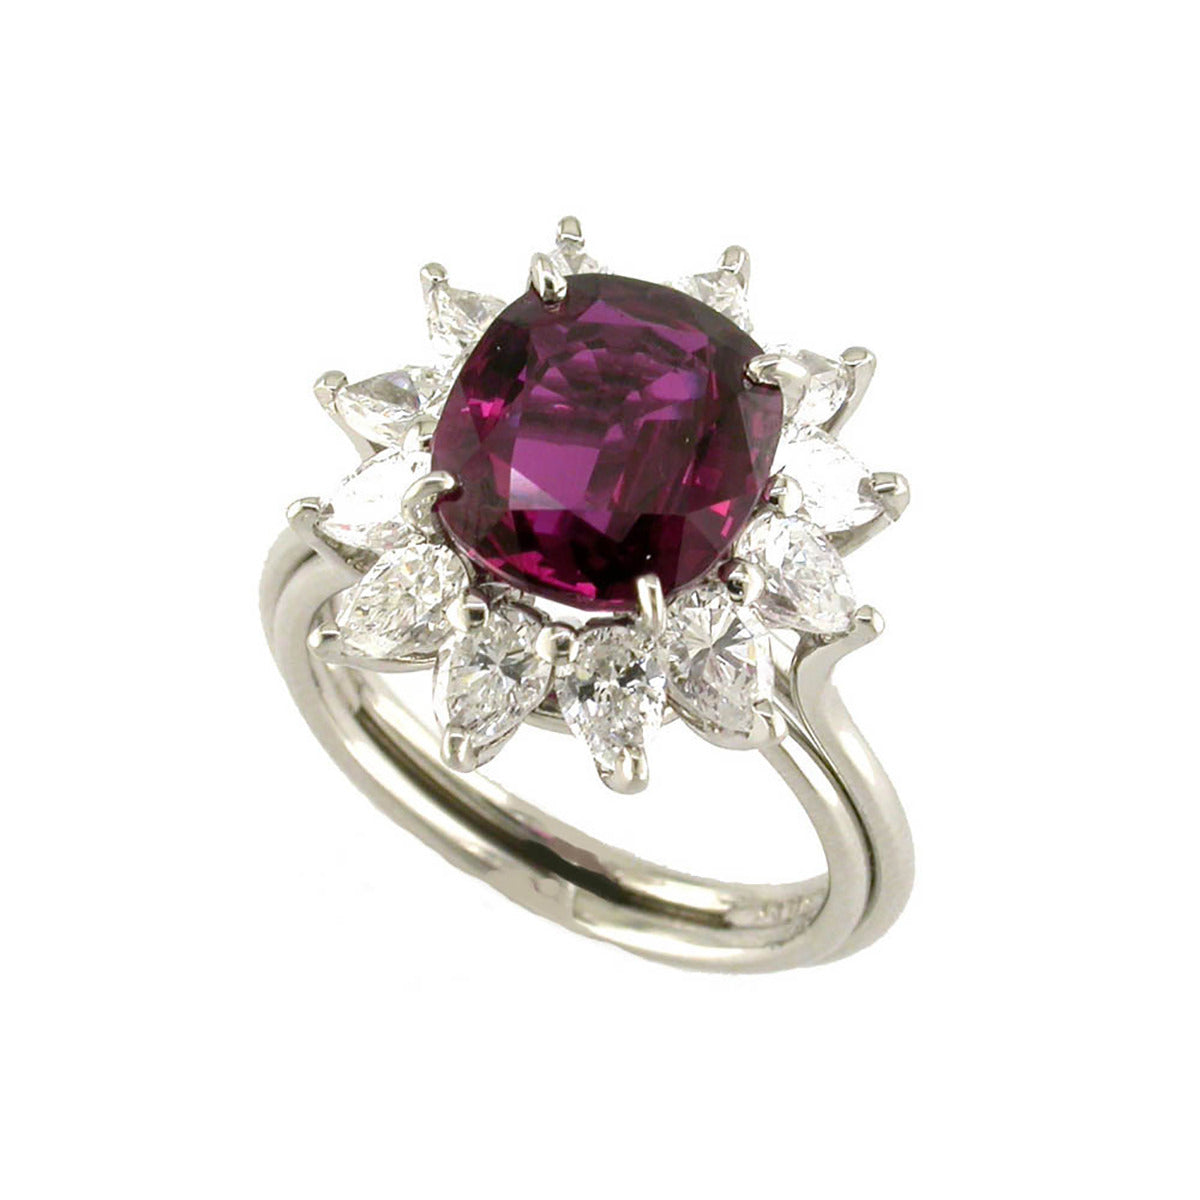 1.30ct ROUND CUT RUBY DIAMOND PLATINUM RING COCKTAIL ENGAGEMENT NATURAL  RICH RED